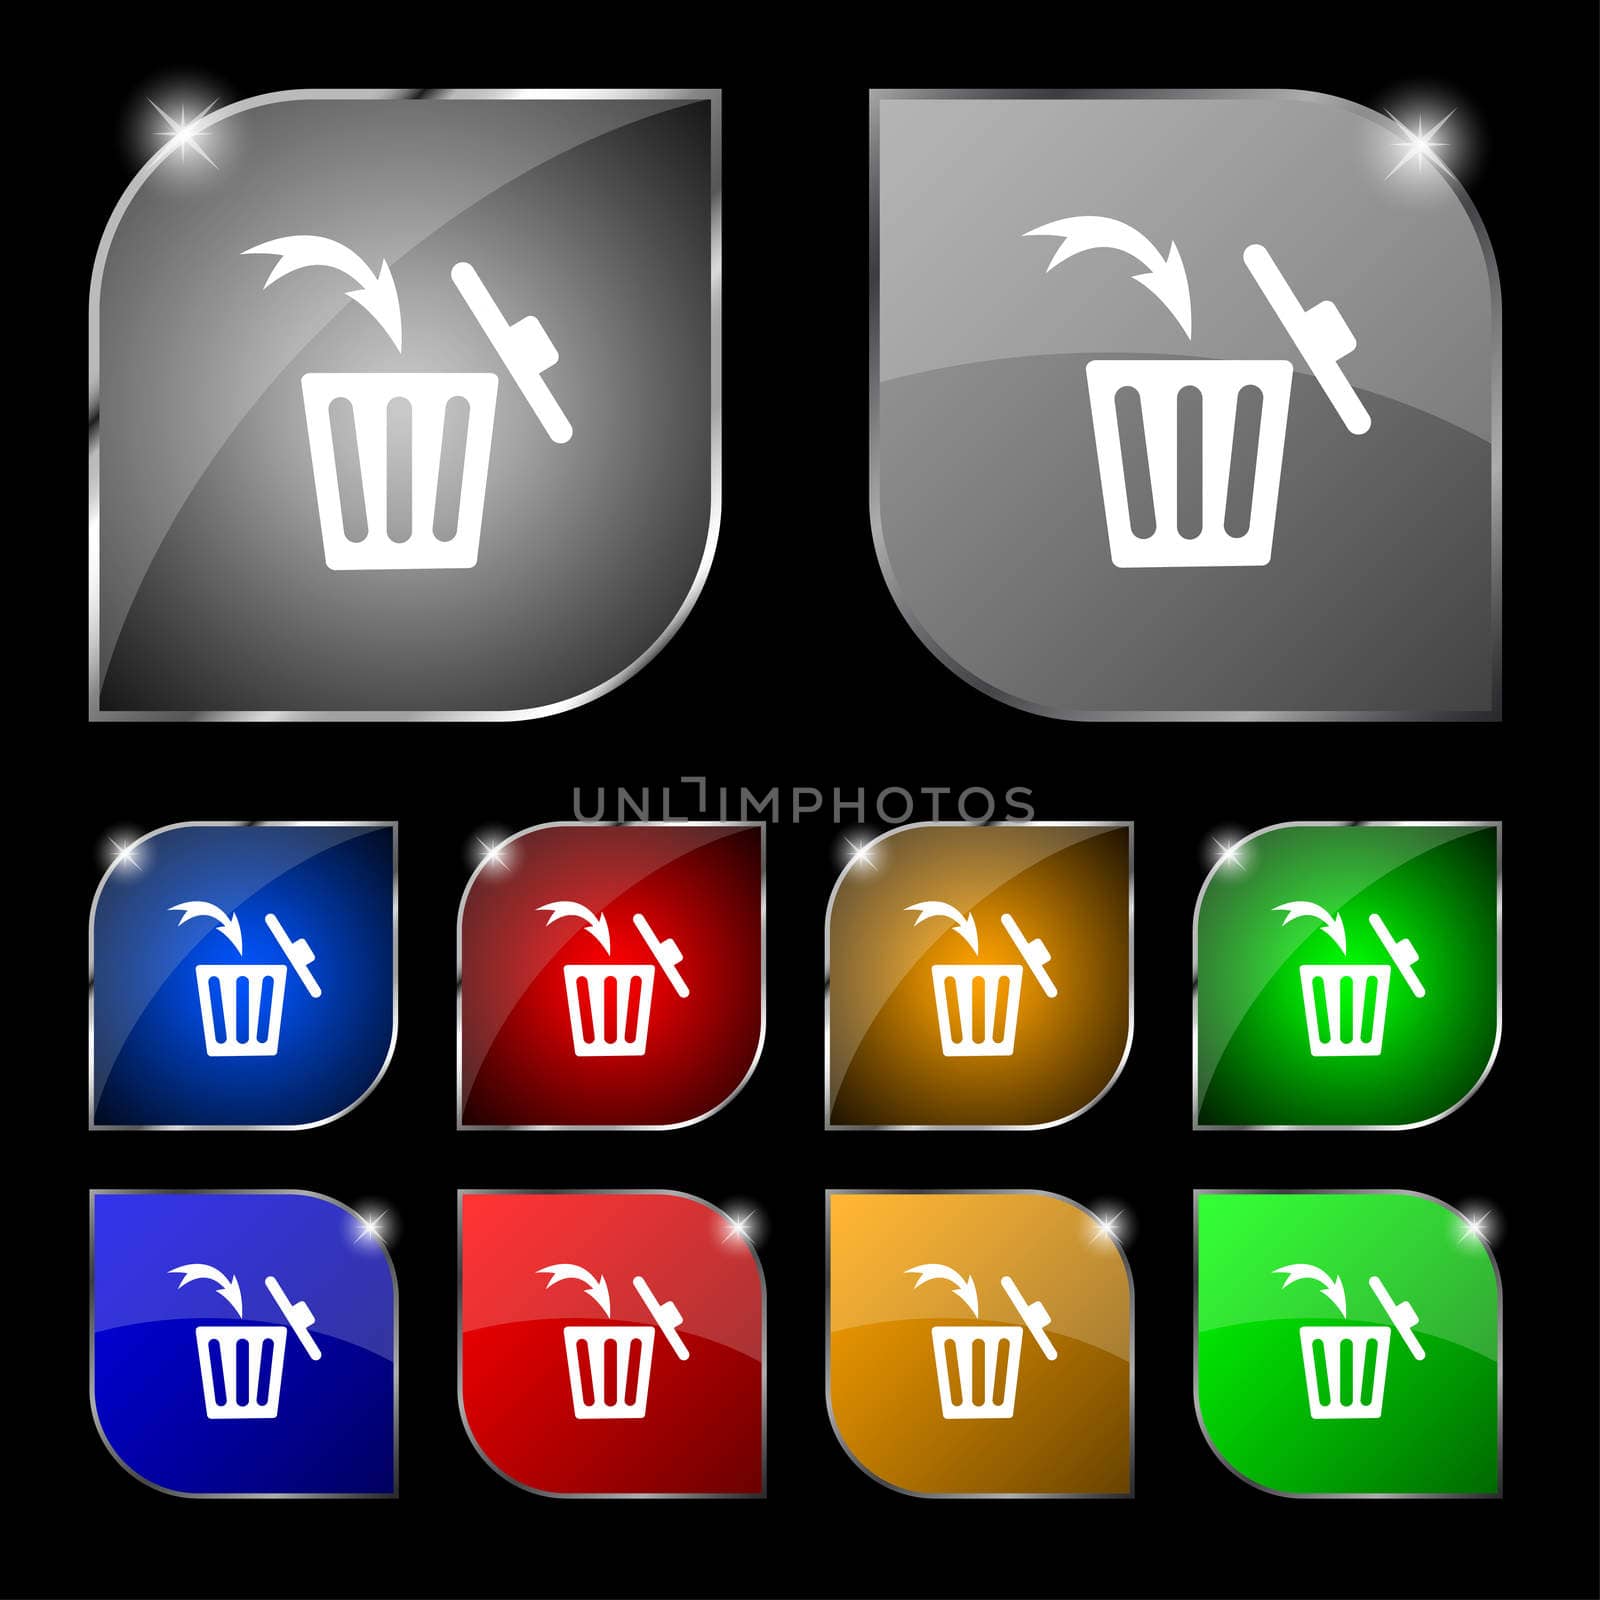 Recycle bin sign icon. Bins symbol. Set colourful buttons. illustration